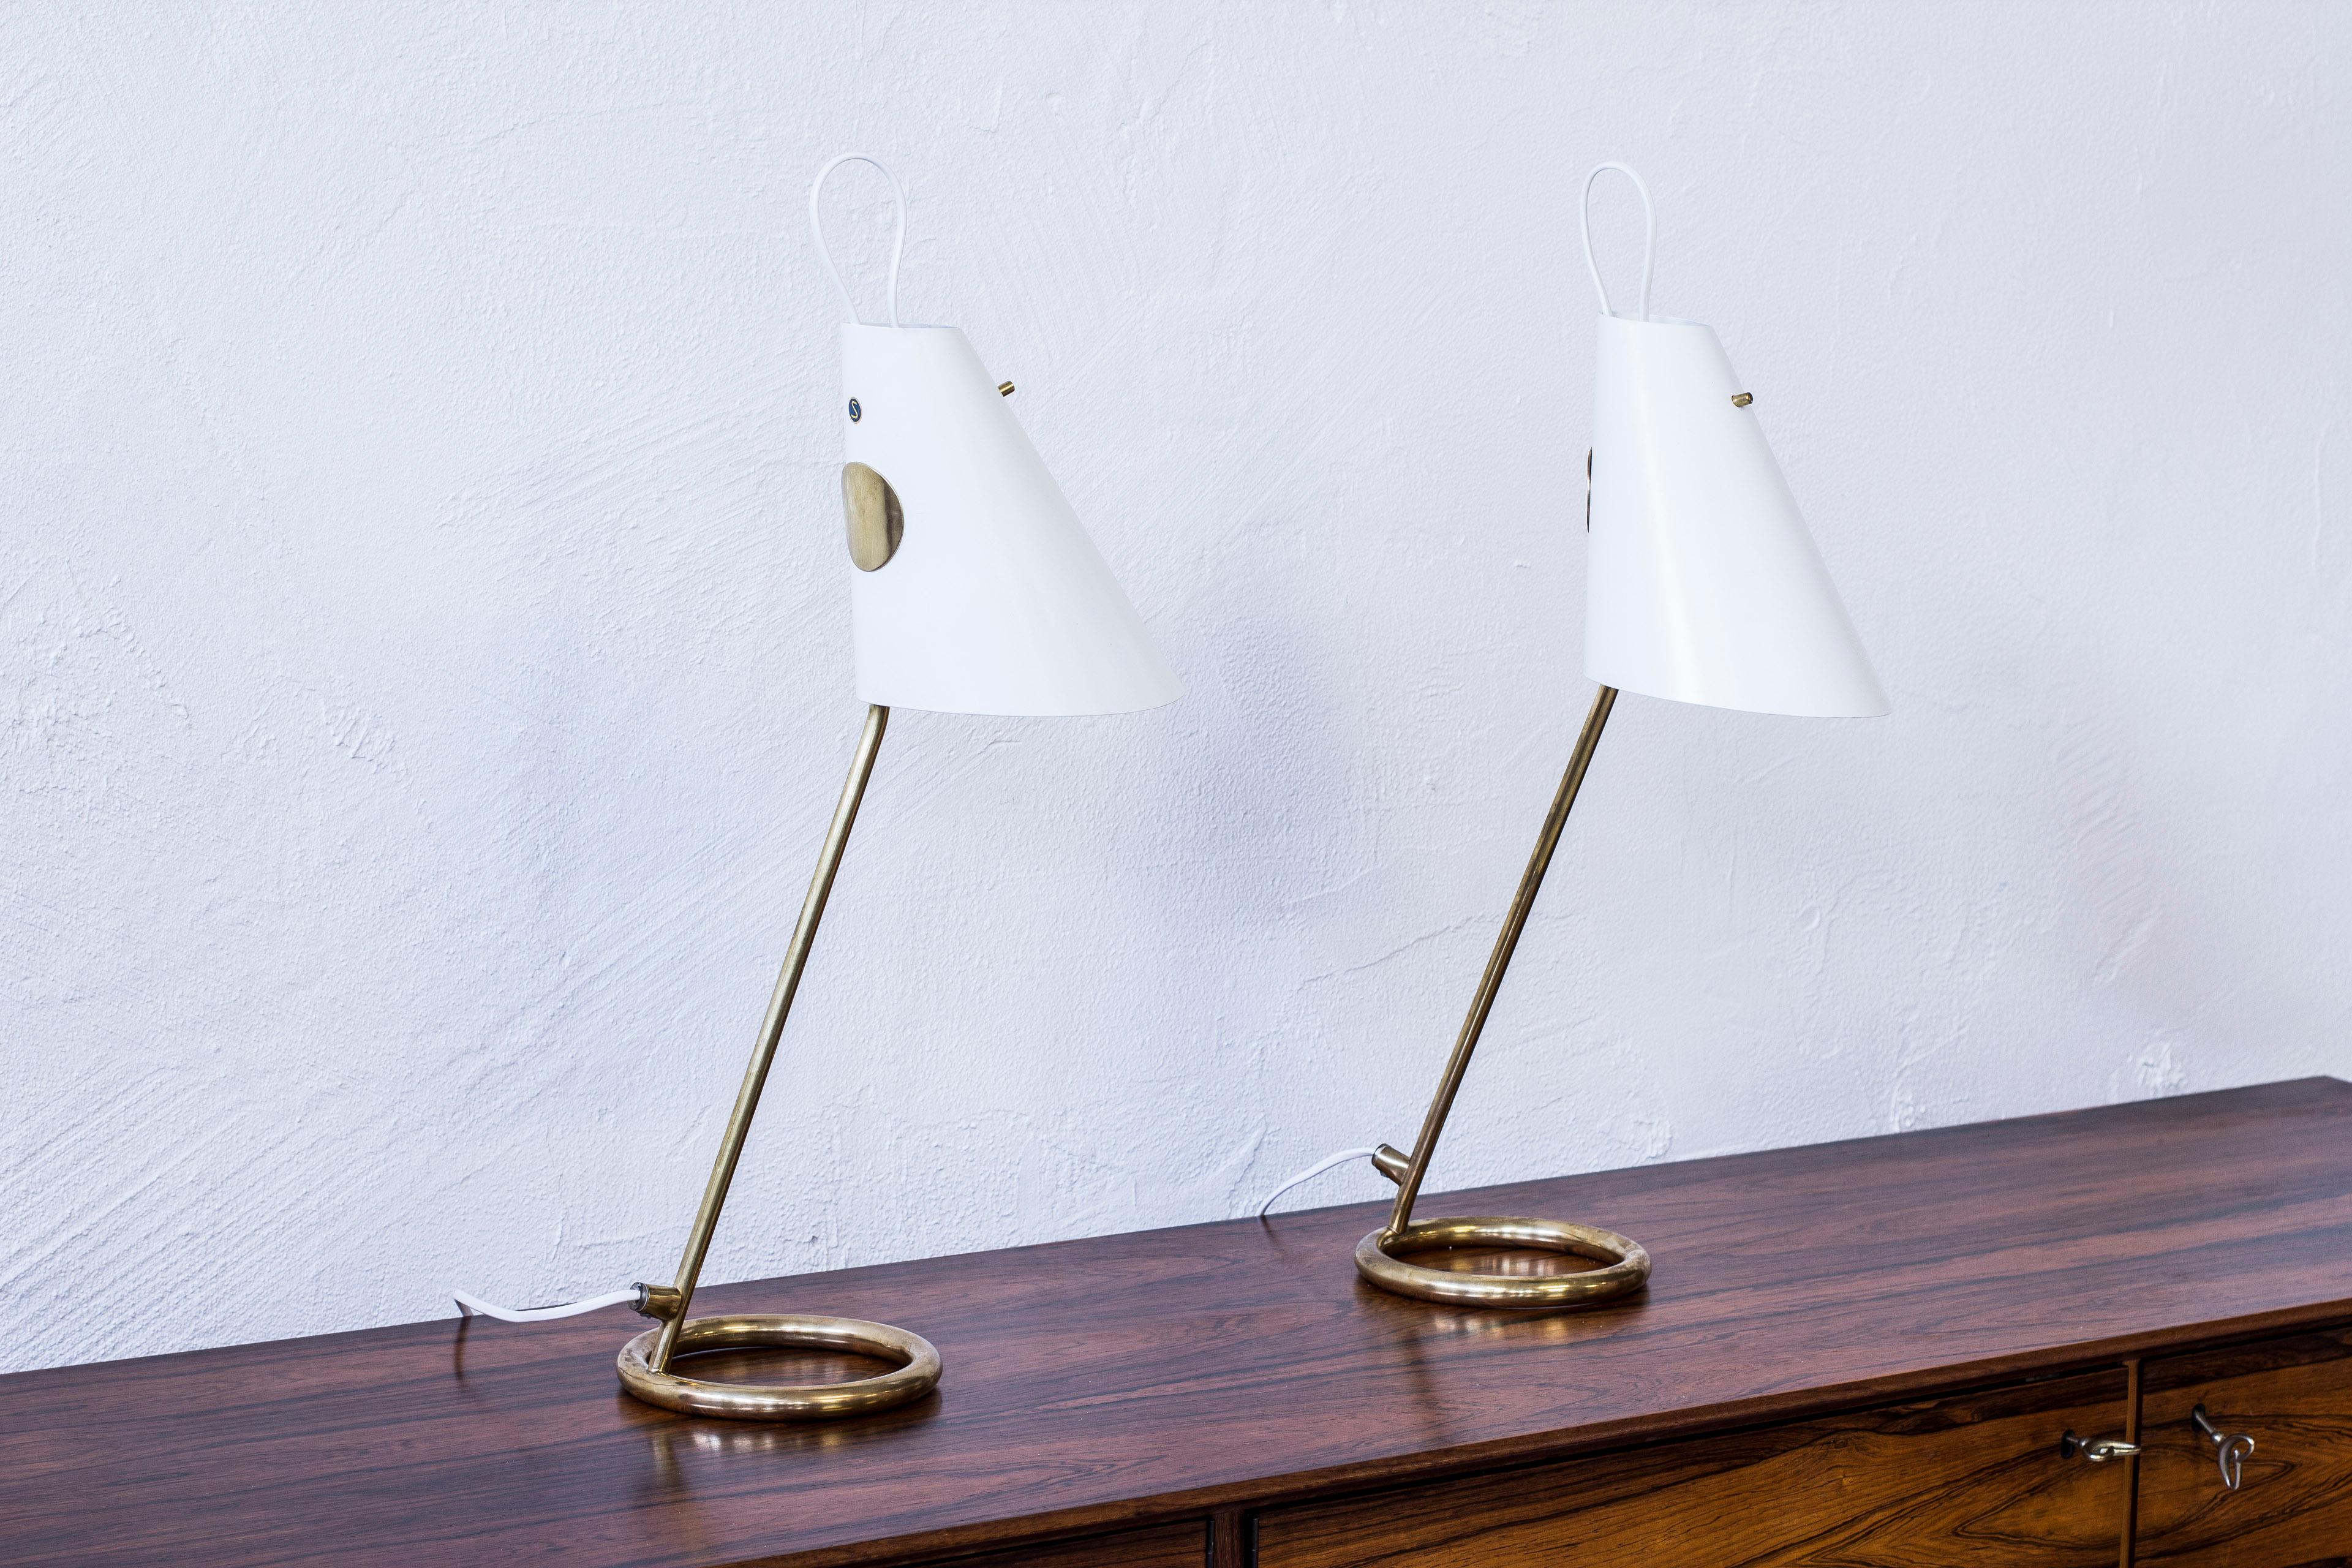 Very rare pair of B 90 table lamps designed by Hans-Agne Jakobsson. Produced by his own company, circa 1961-62 in very few numbers. Made from polished brass with light grey lacquered aluminum shades. Custom light switch in solid brass. Both